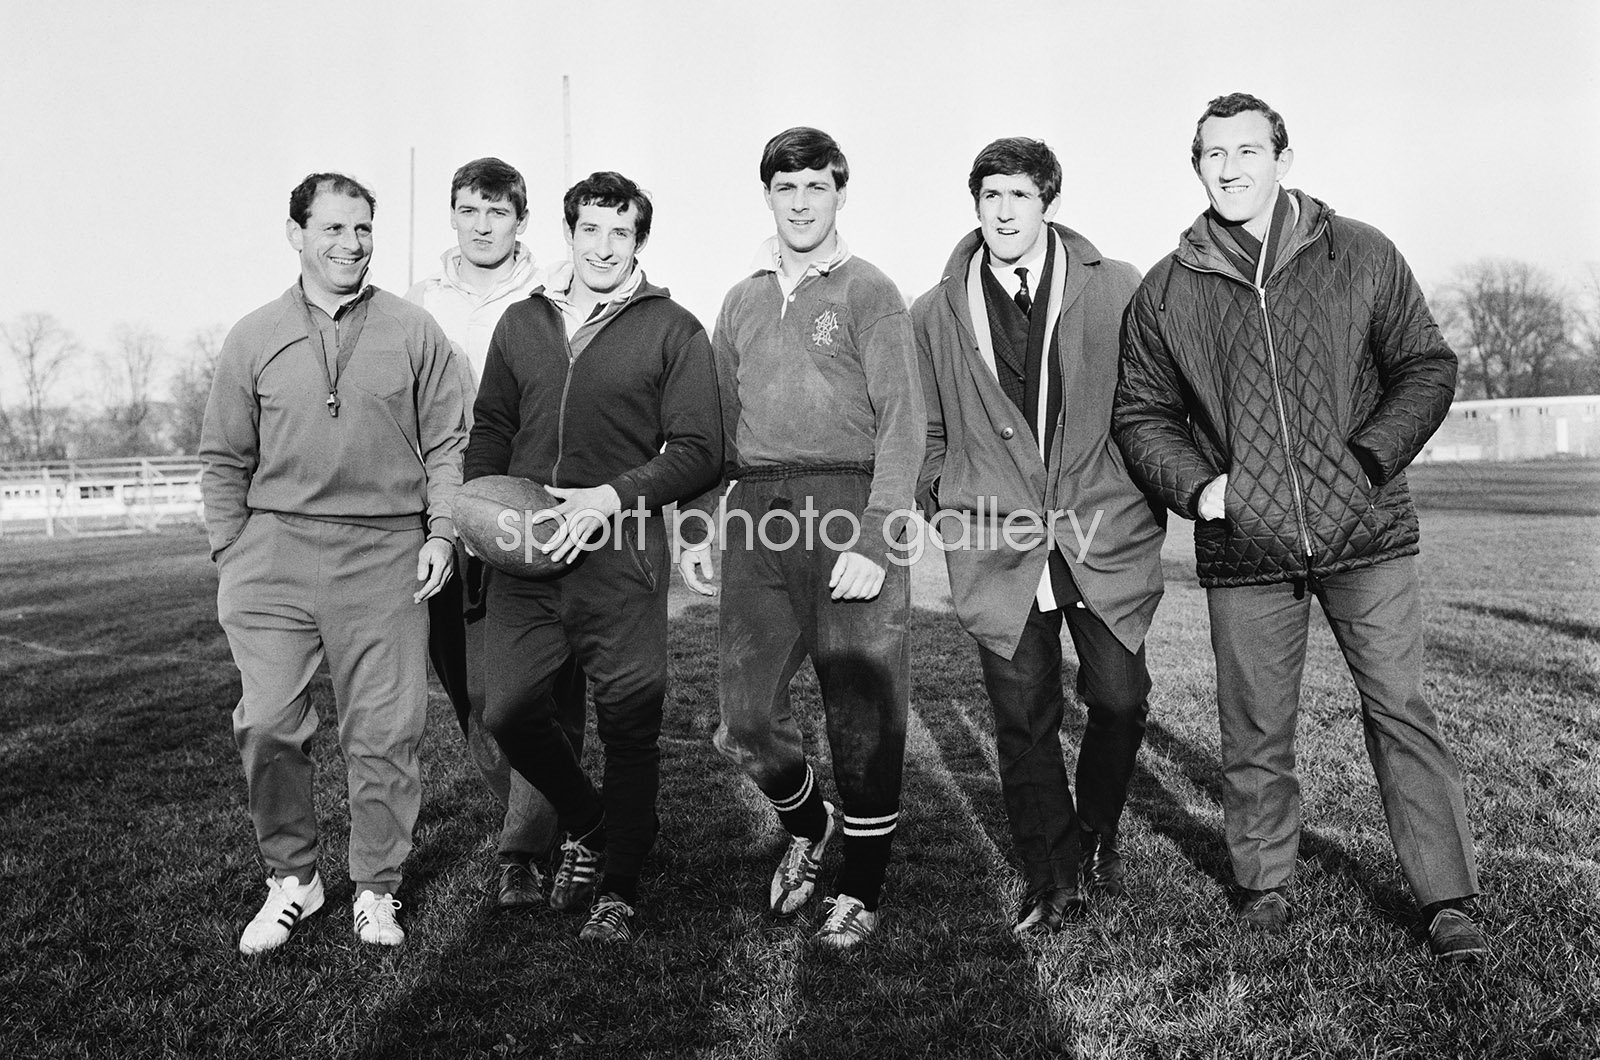 1968 lions tour to south africa